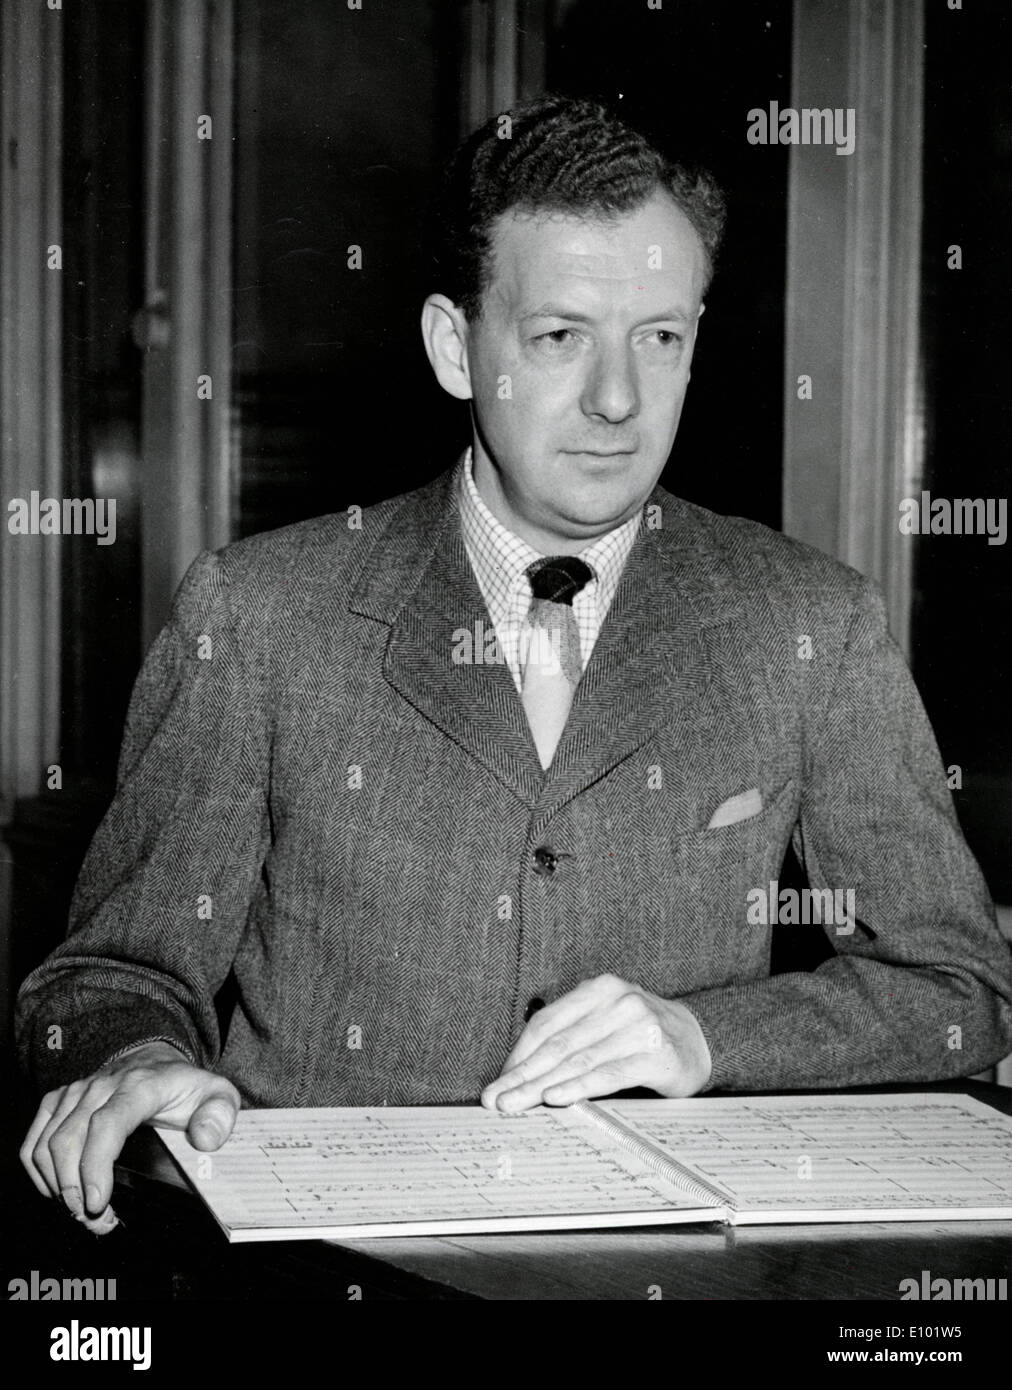 English composer, conductor and pianist, BENJAMIN BRITTEN Edward Benjamin Britten, Baron Britten of Aldeburgh Stock Photo